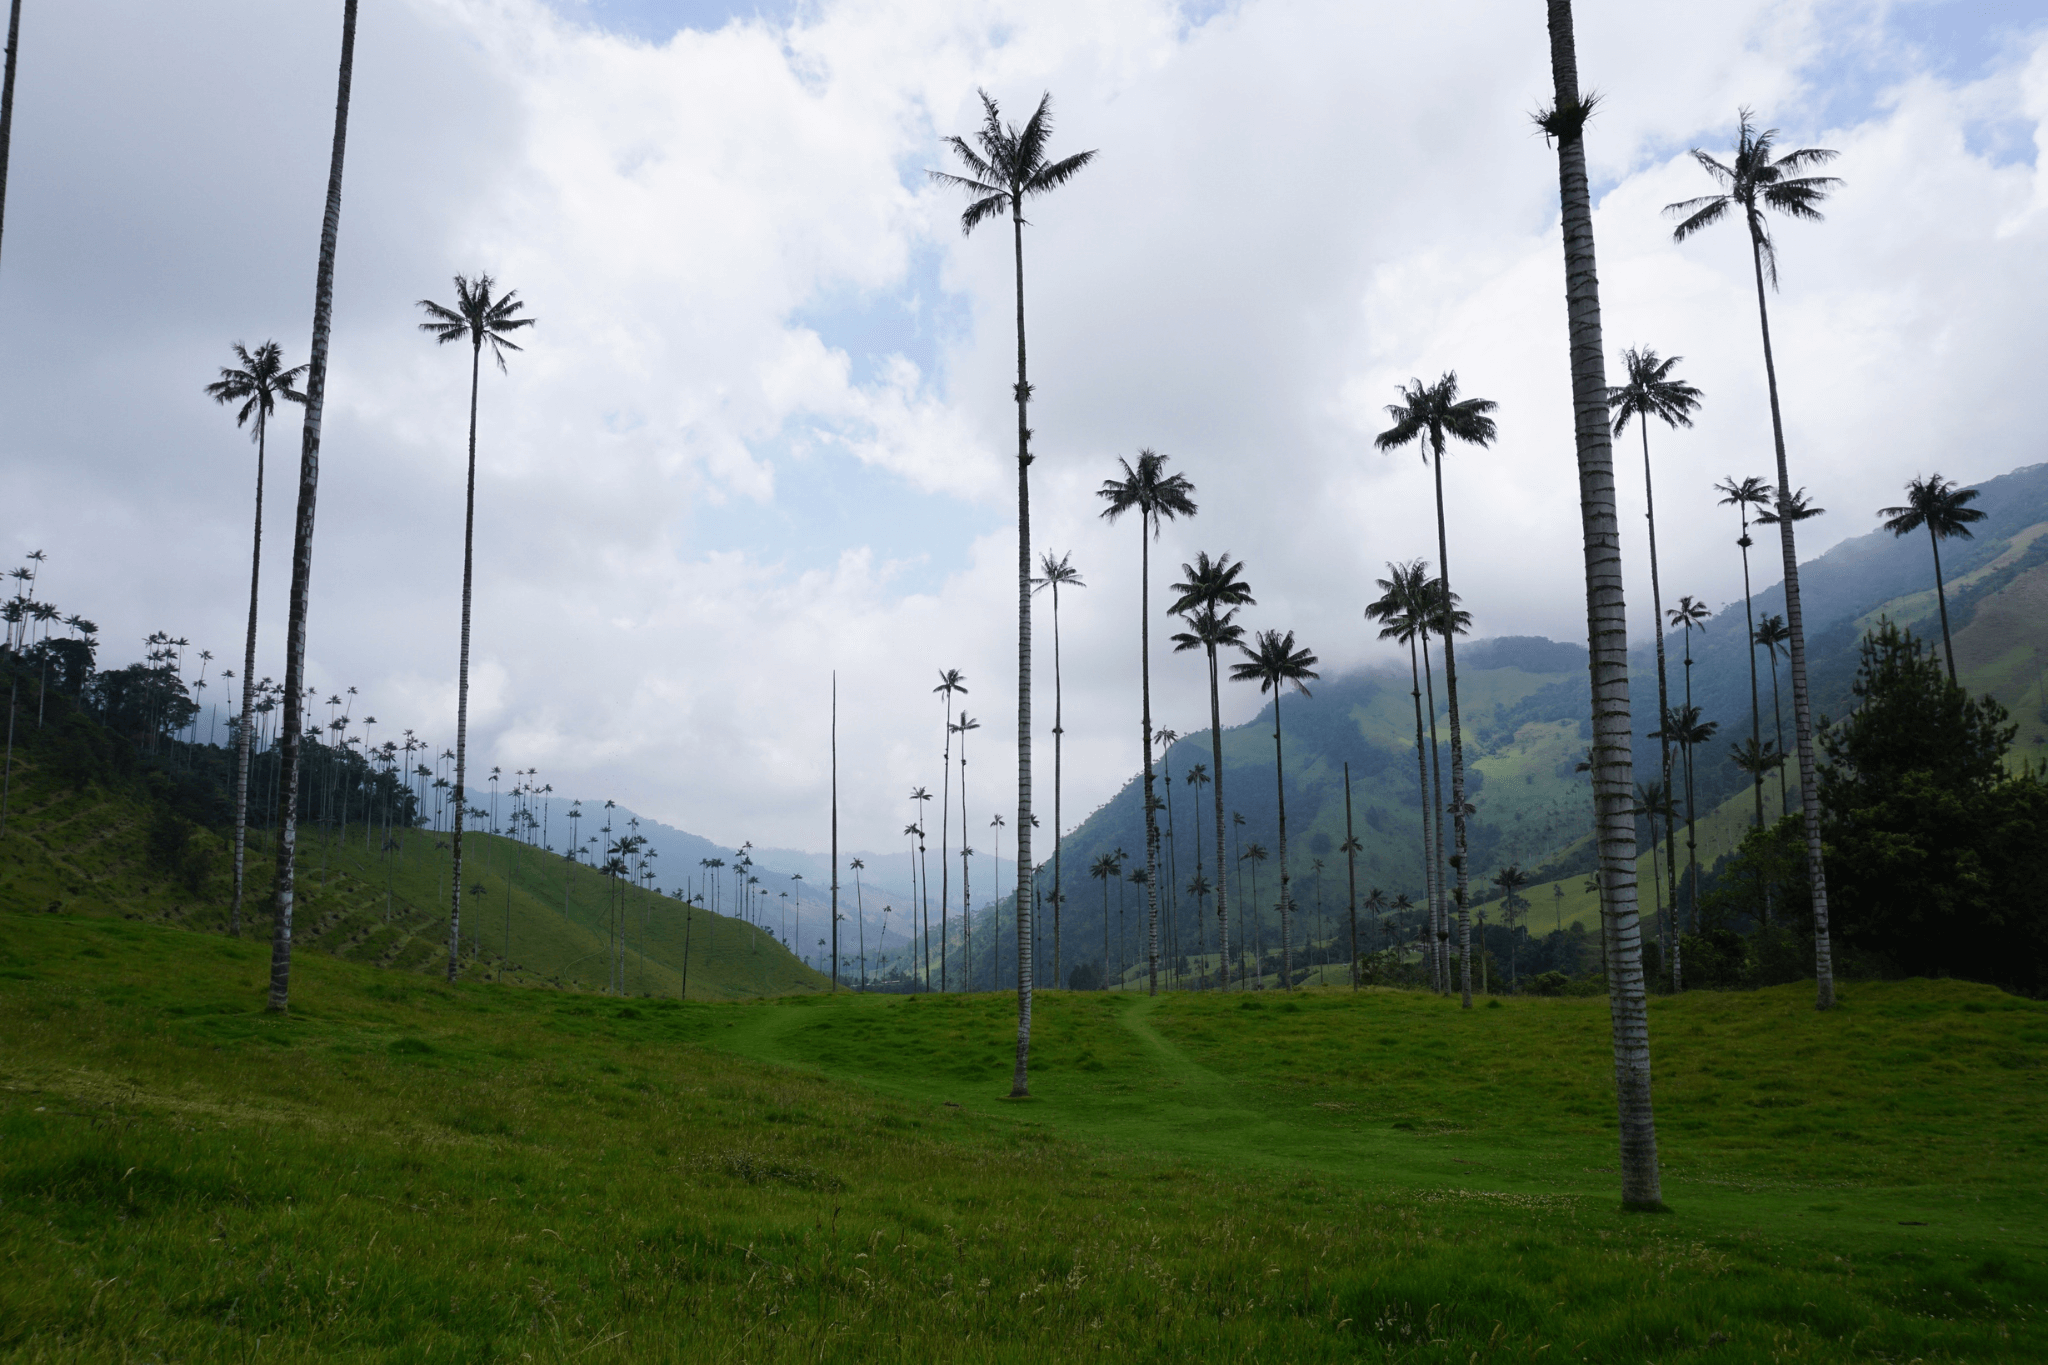 View within Valle de Cocora